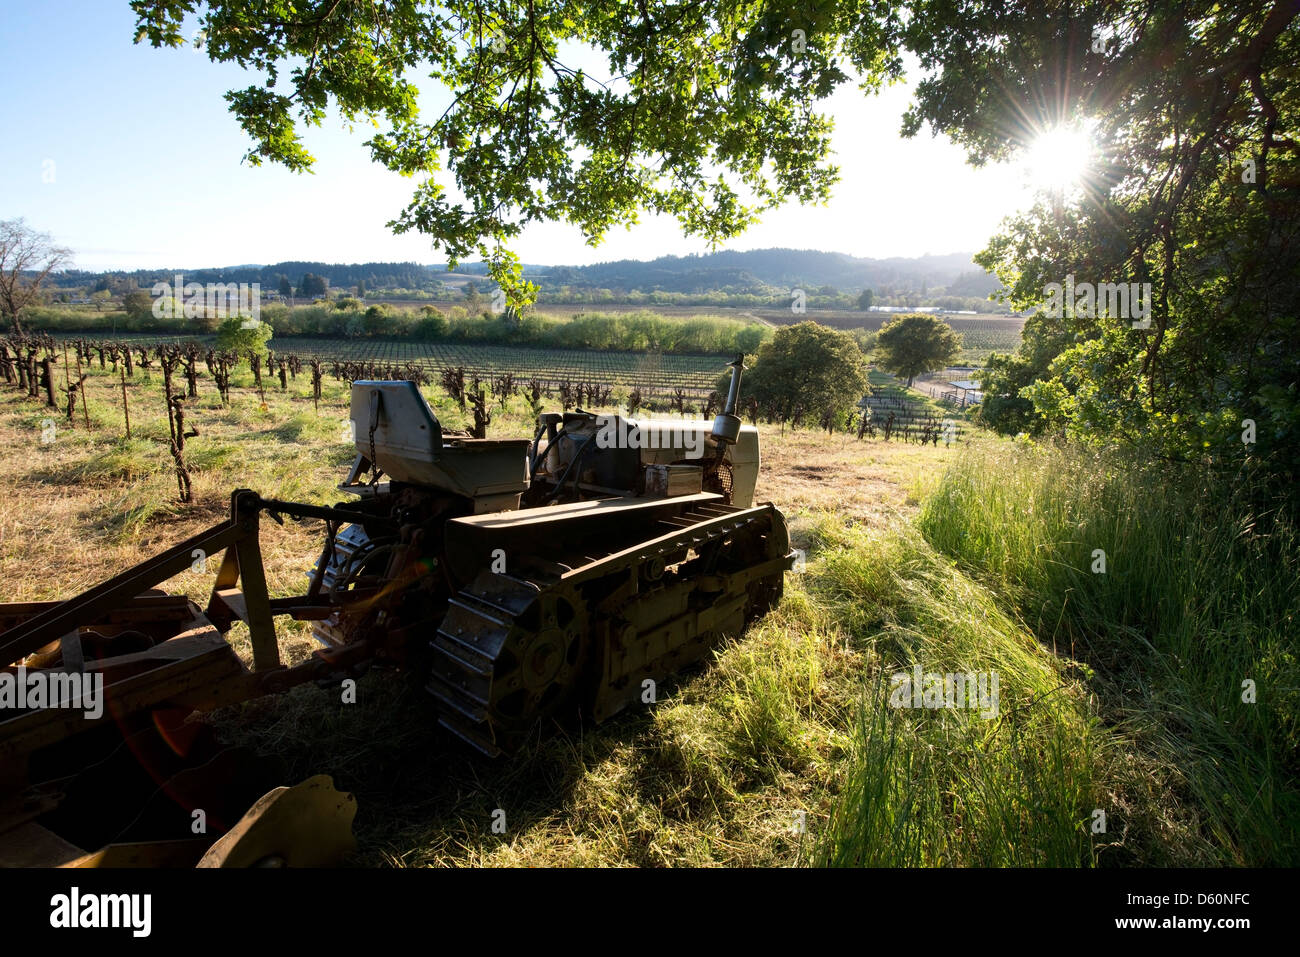 An old tractor sits on a vineyard in the Dry Creek Valley appellation of the Sonoma Wine Country near Healdsburg, CA. Stock Photo